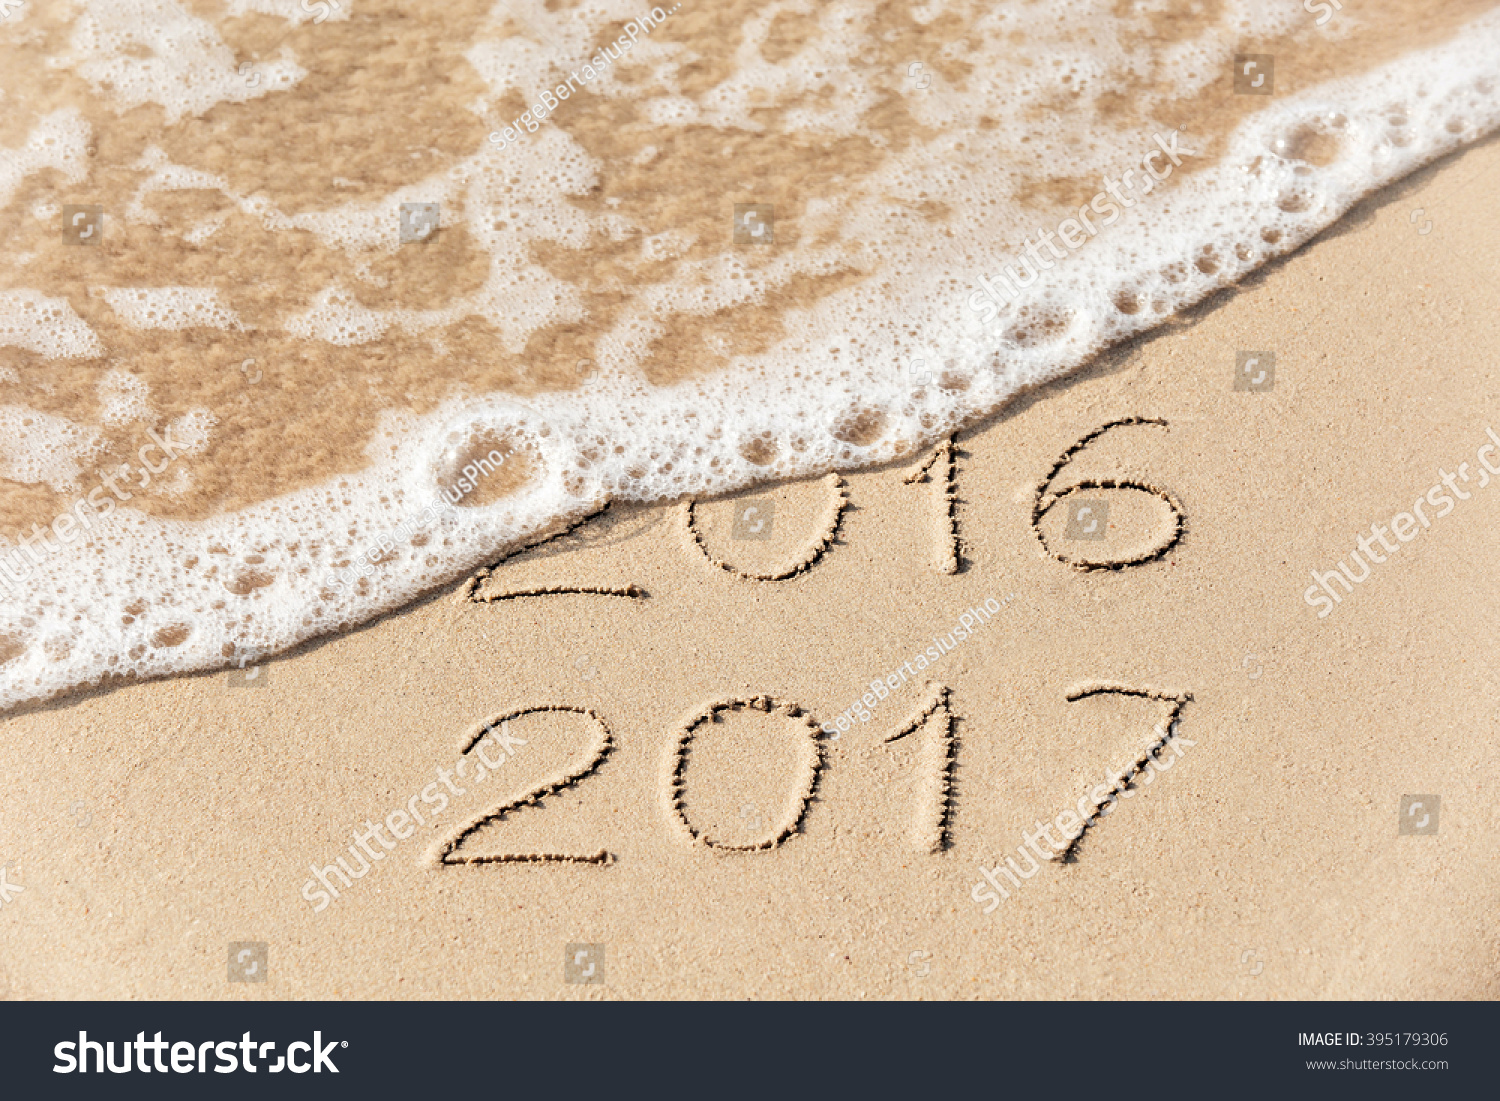 2016 2017  inscription written in the wet yellow beach sand being washed with sea water wave. Concept of celebrating the New Year at some exotic place #395179306